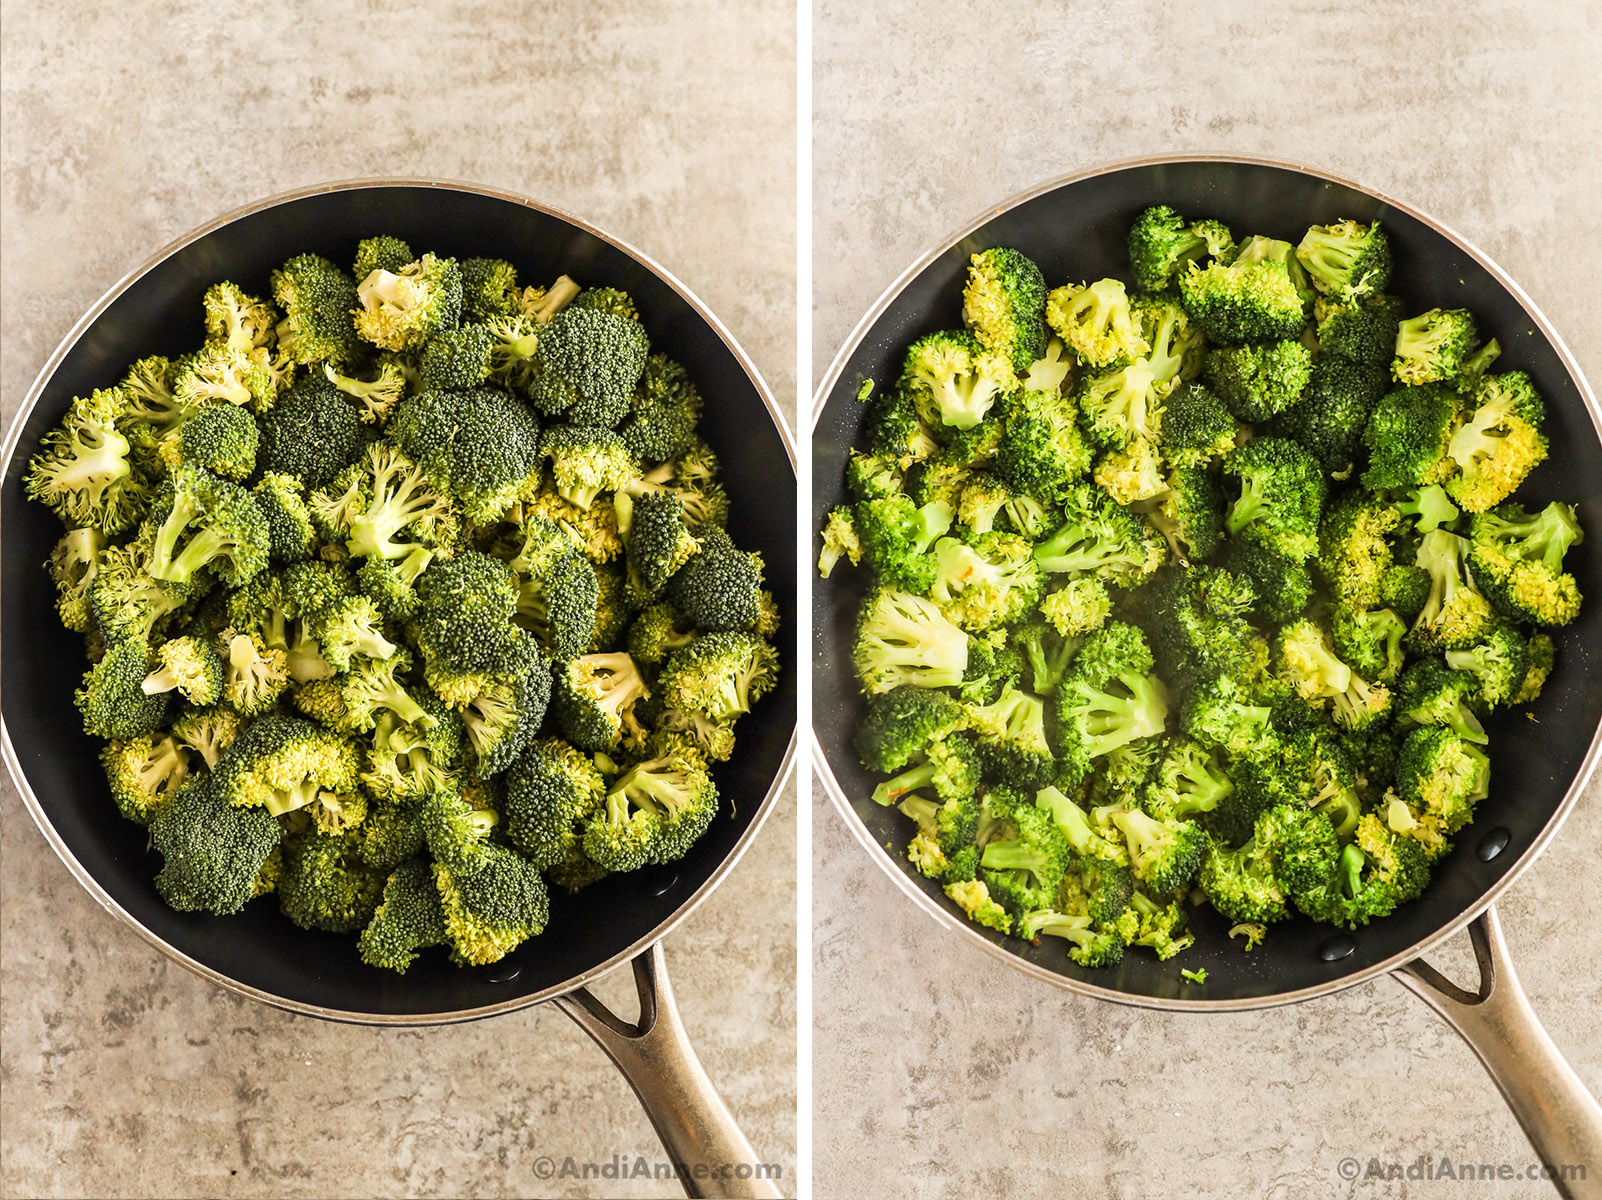 Broccoli florets in a frying pan, first raw, then steamed and cooked